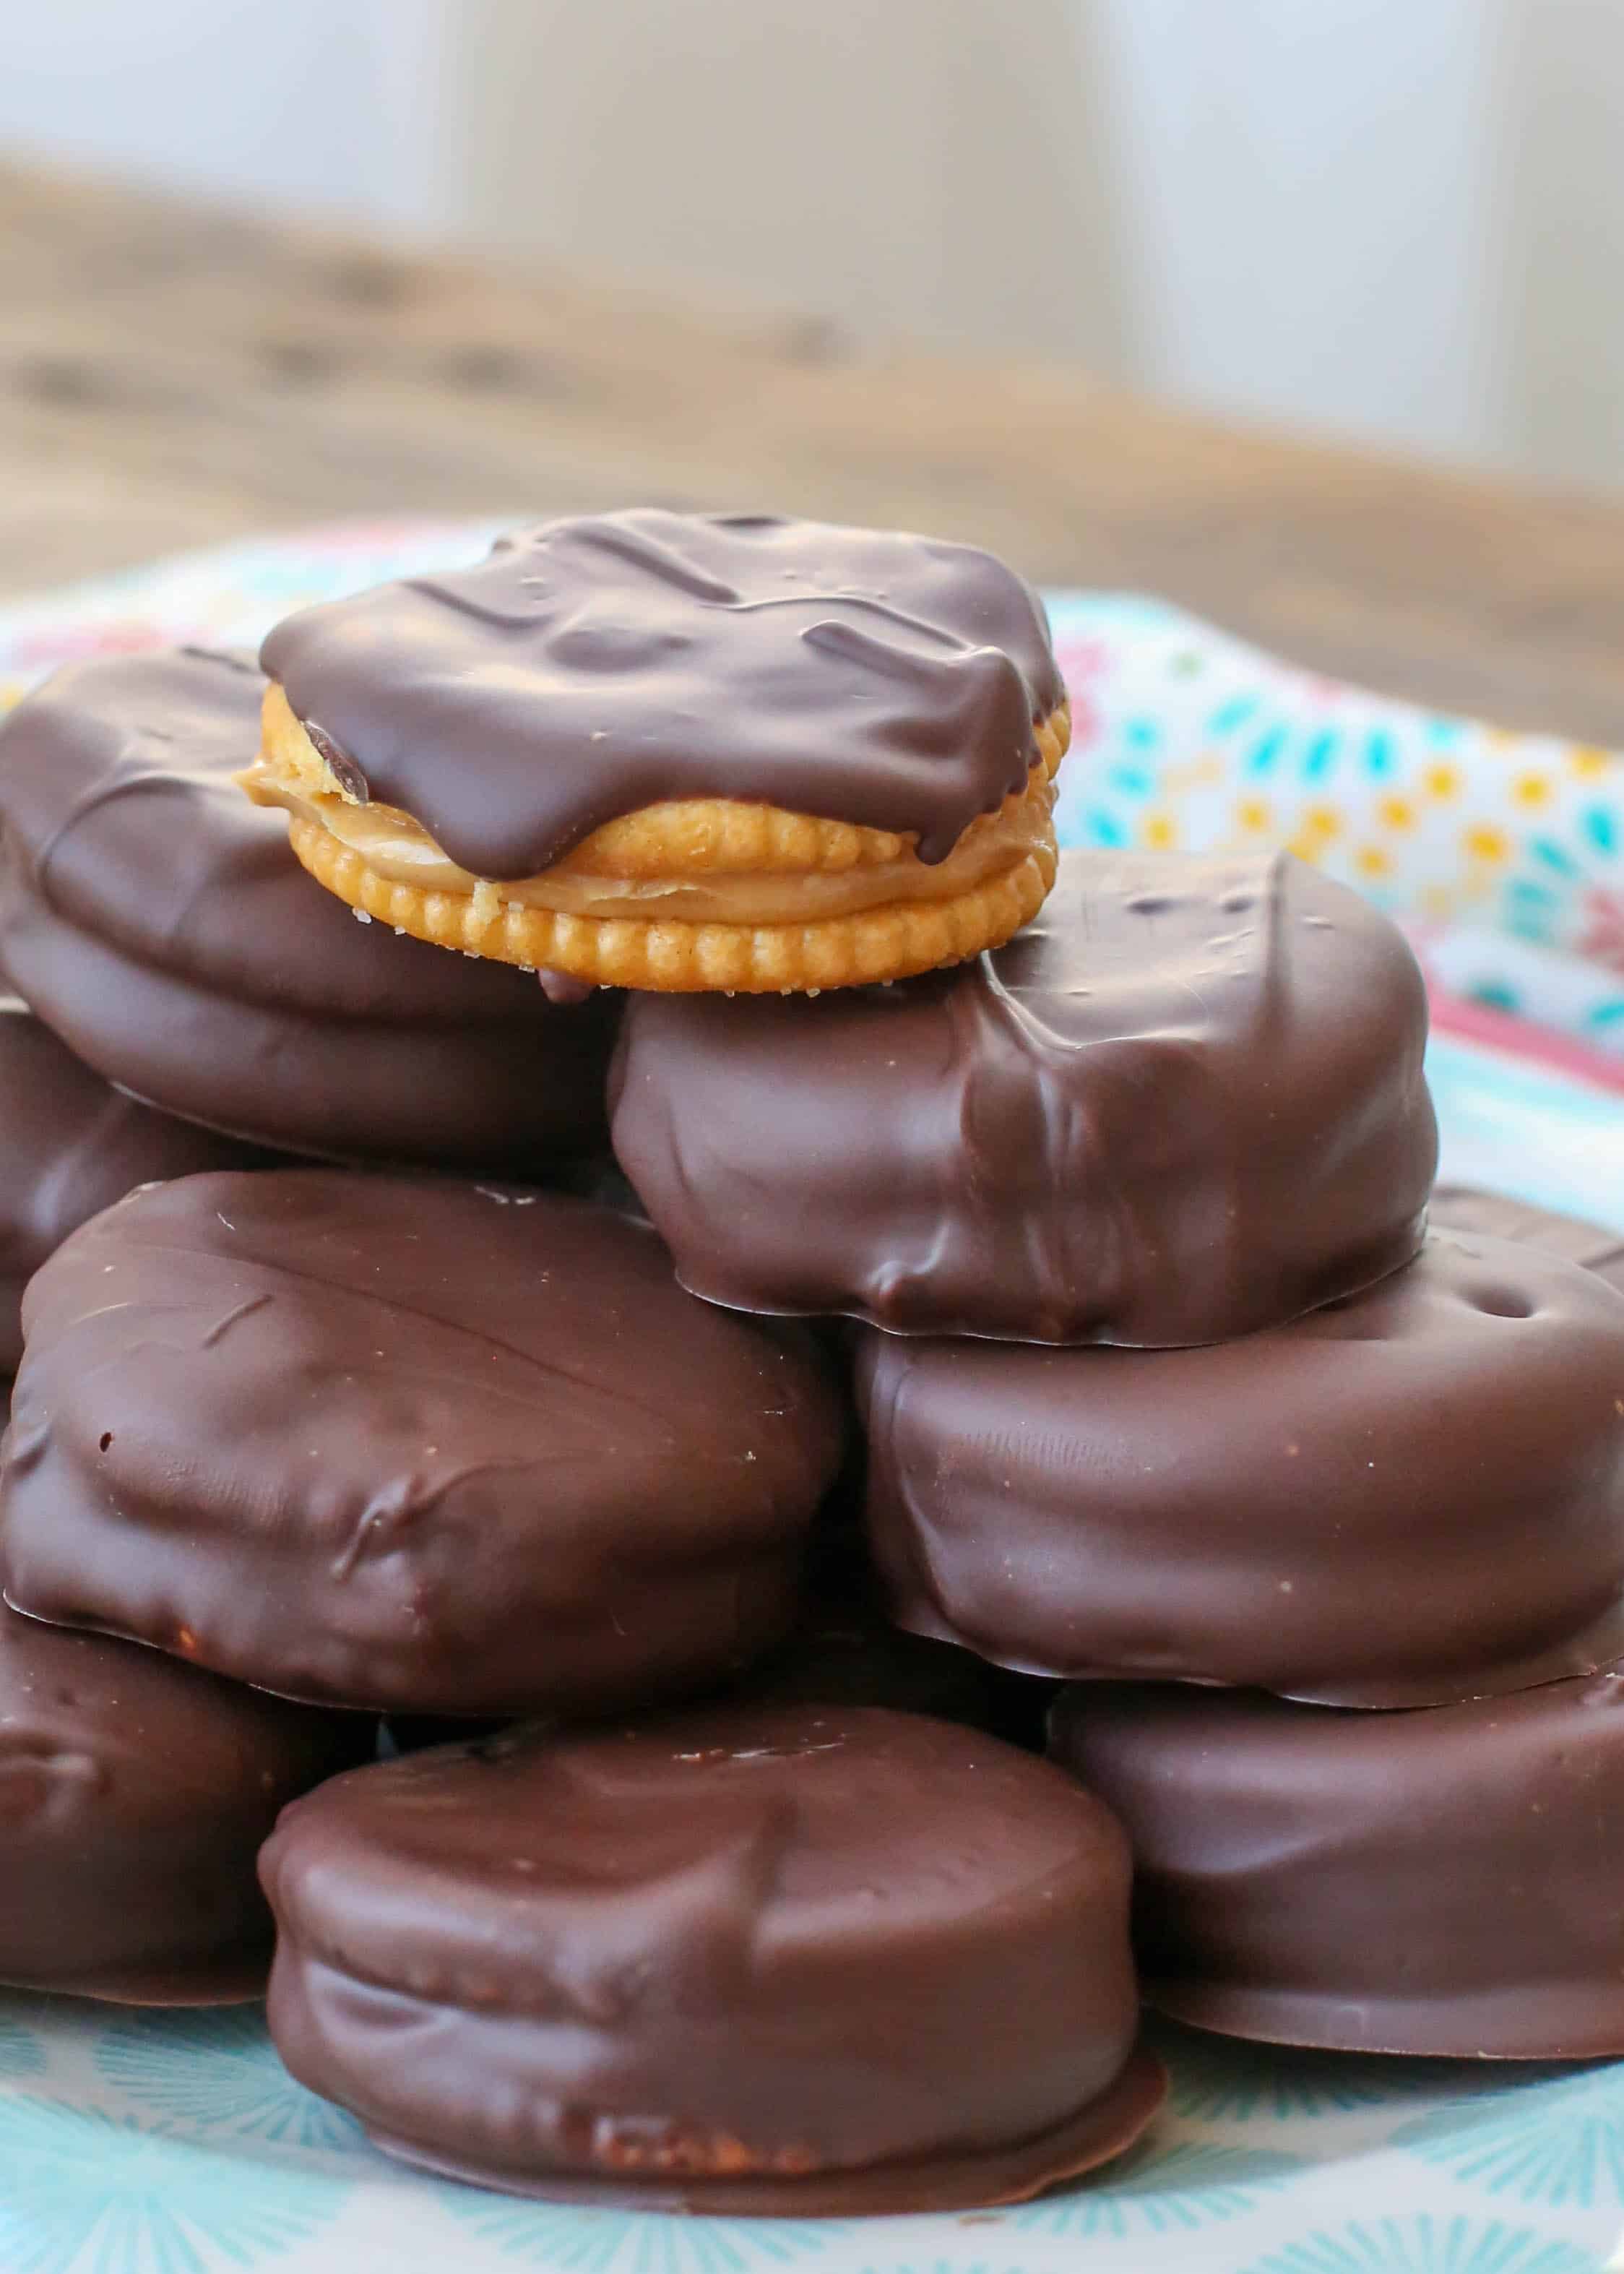 Chocolate Peanut Butter Ritz Cookies | Barefeet in the Kitchen